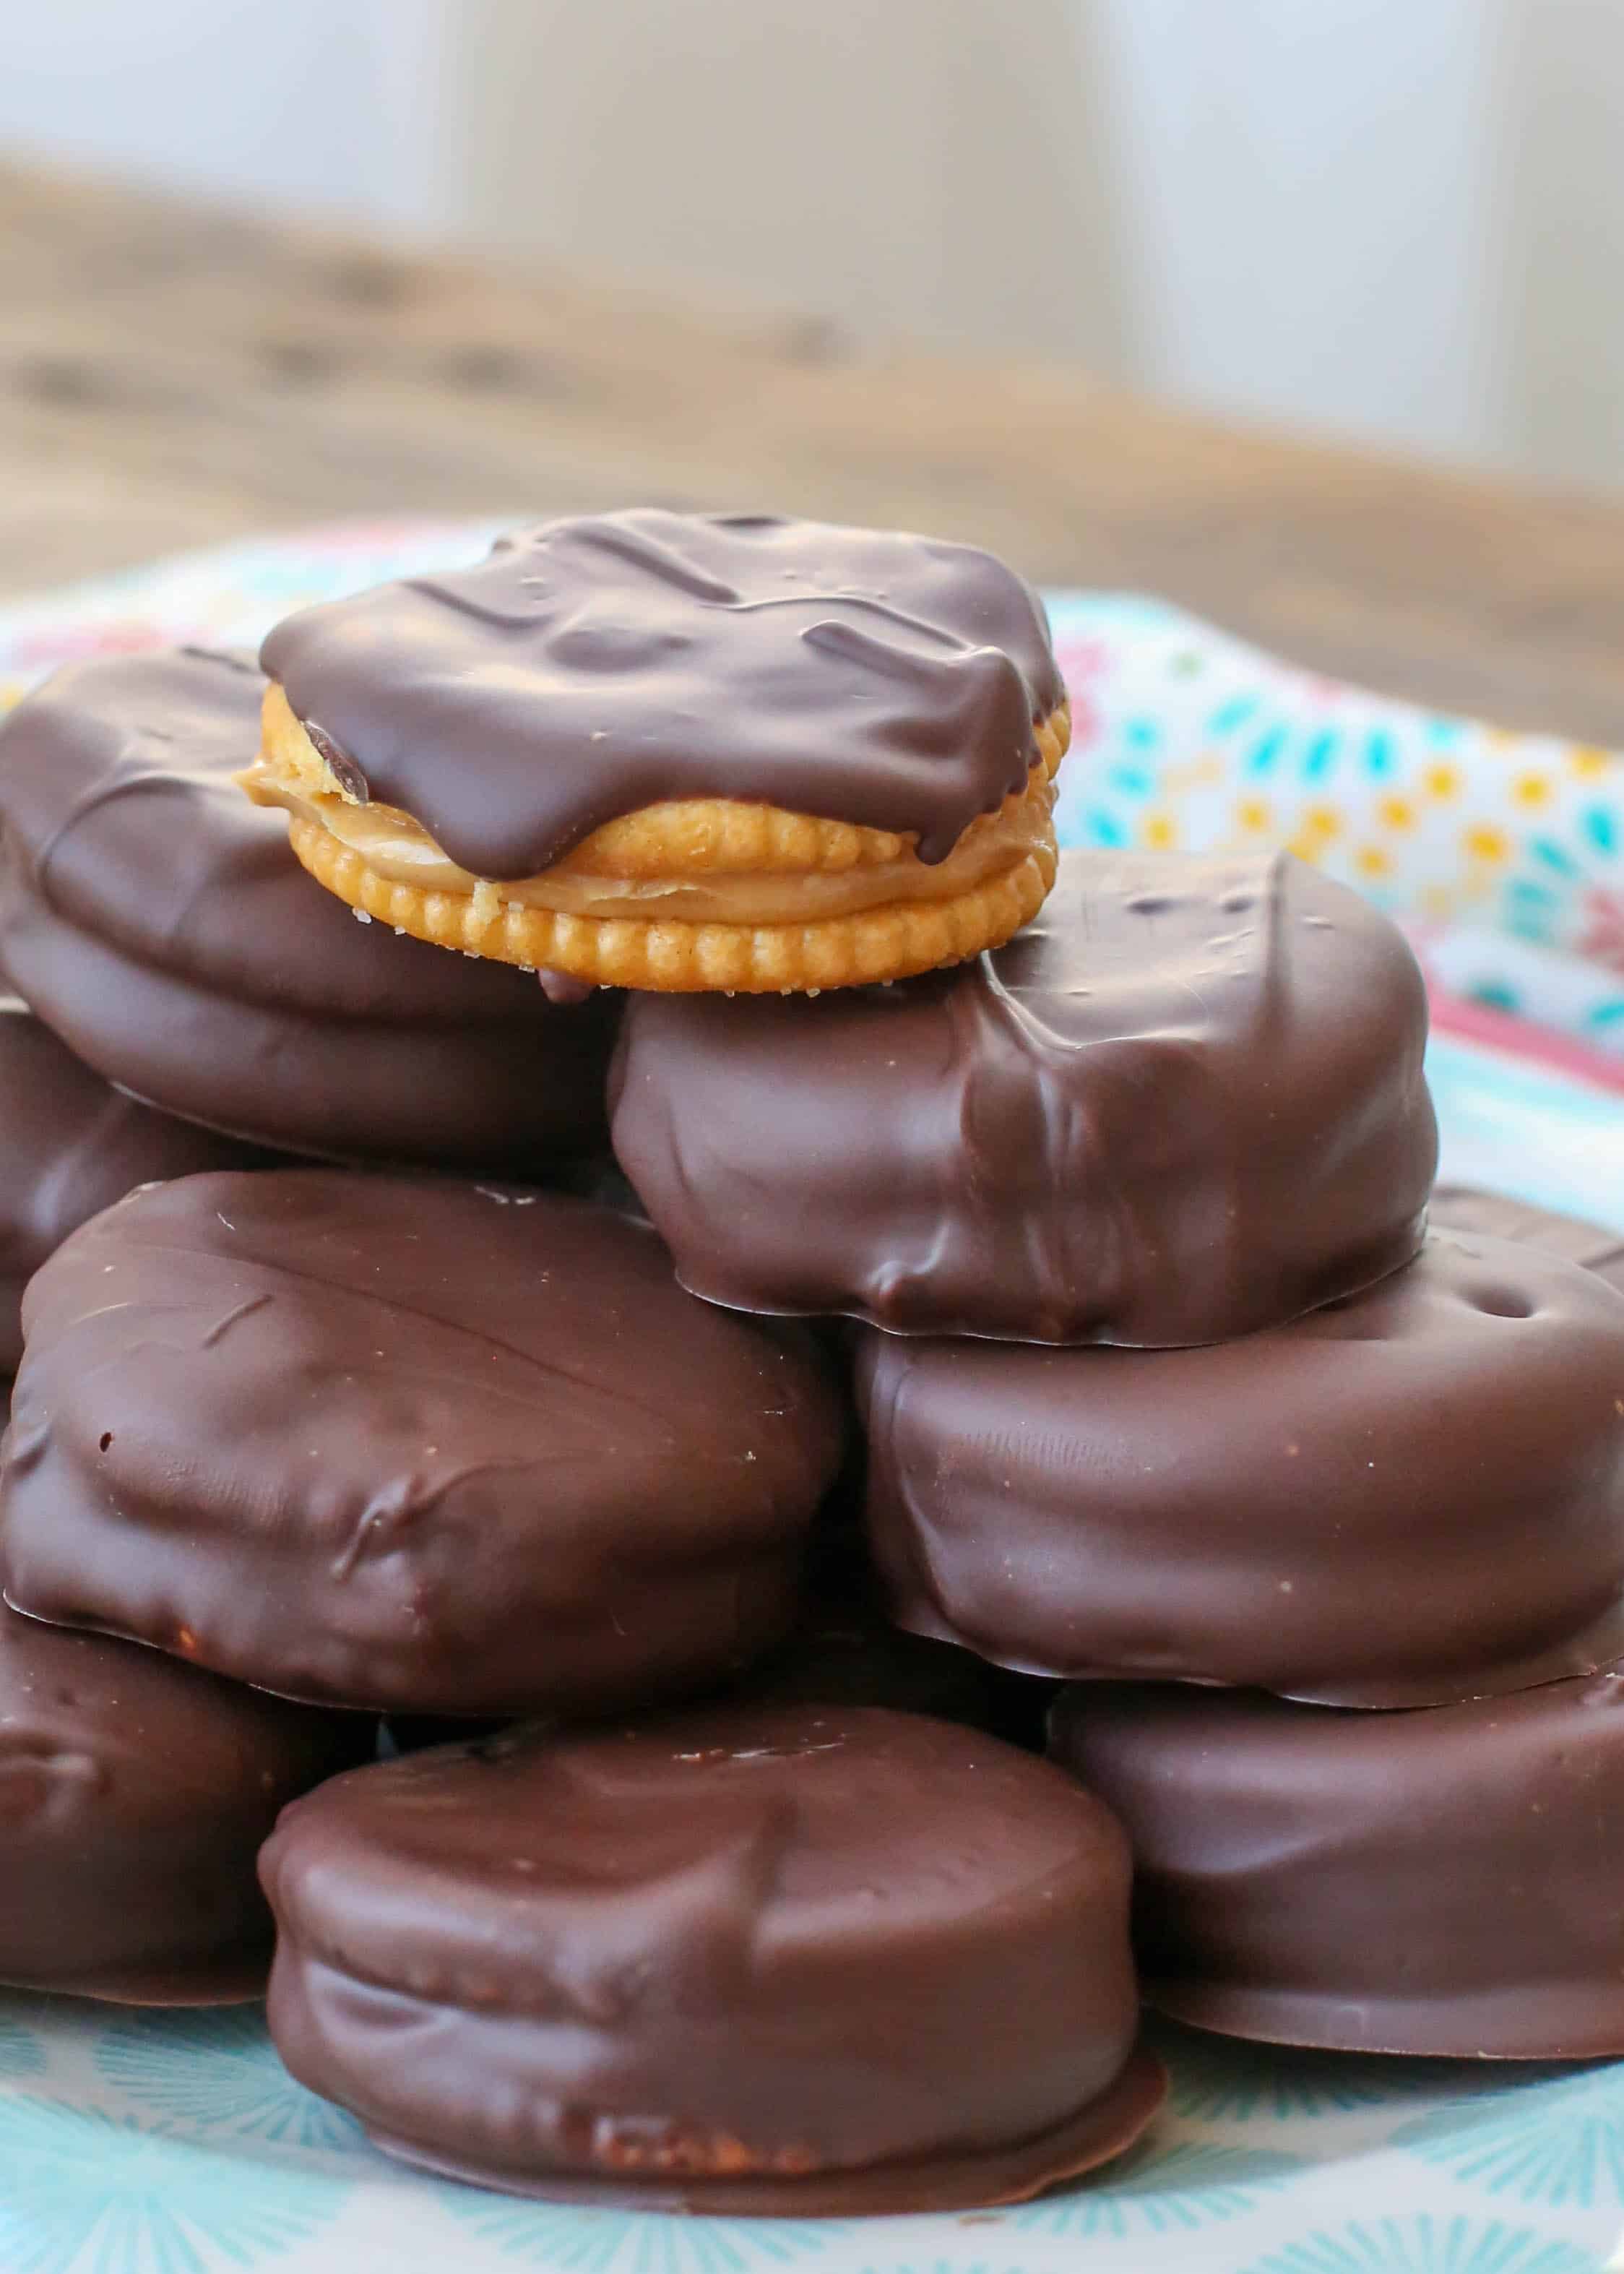 Chocolate Peanut Butter Ritz Cookies | Barefeet in the Kitchen